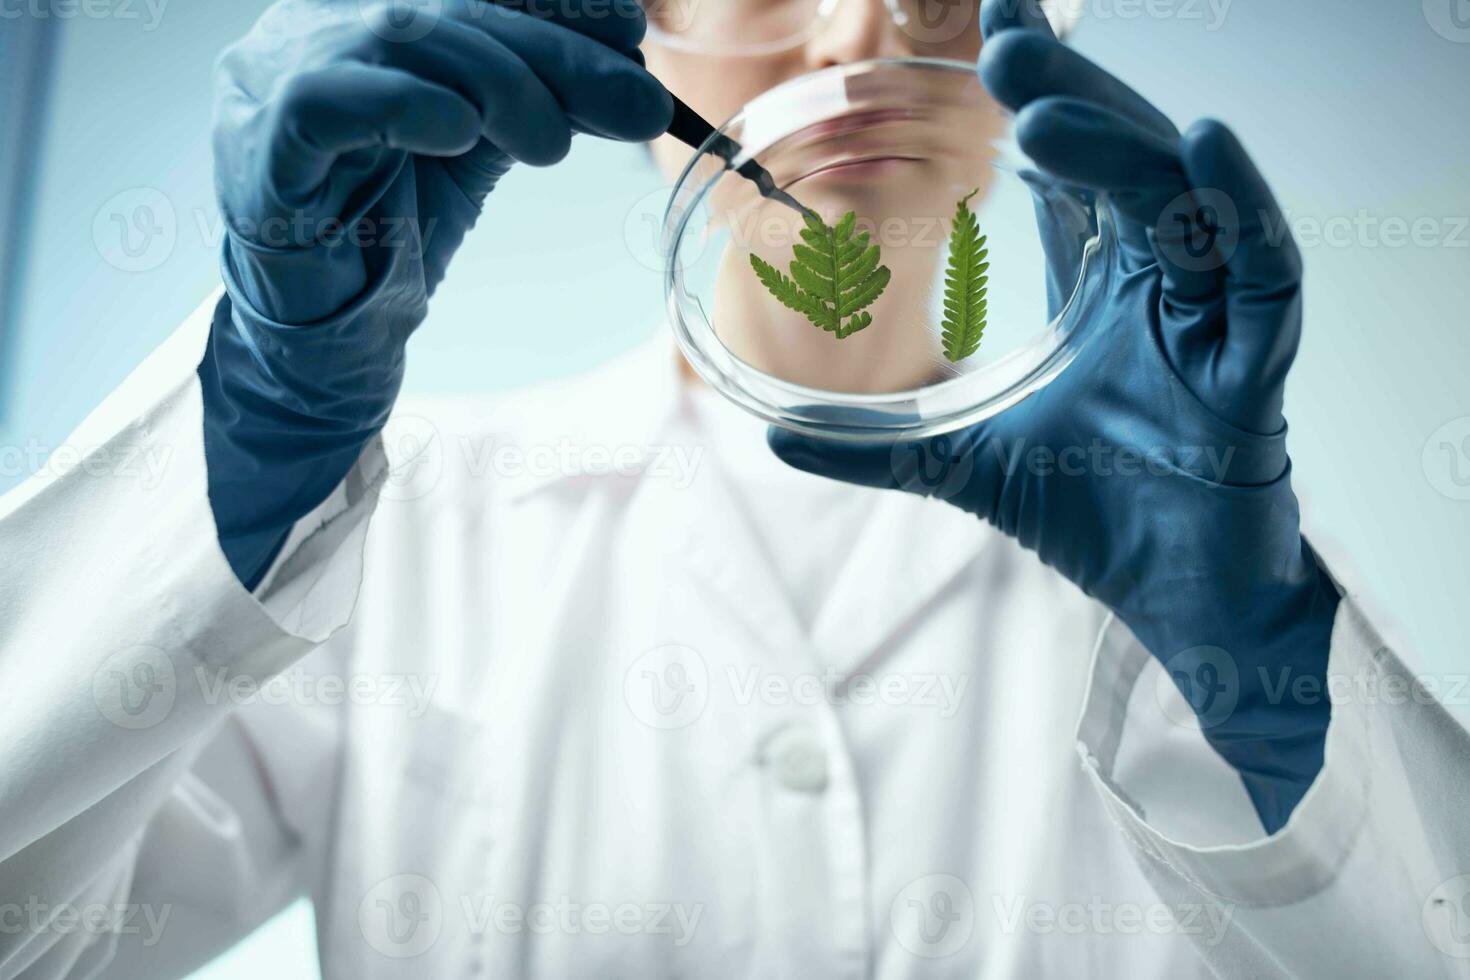 Woman in white coat biology research diagnostics science photo